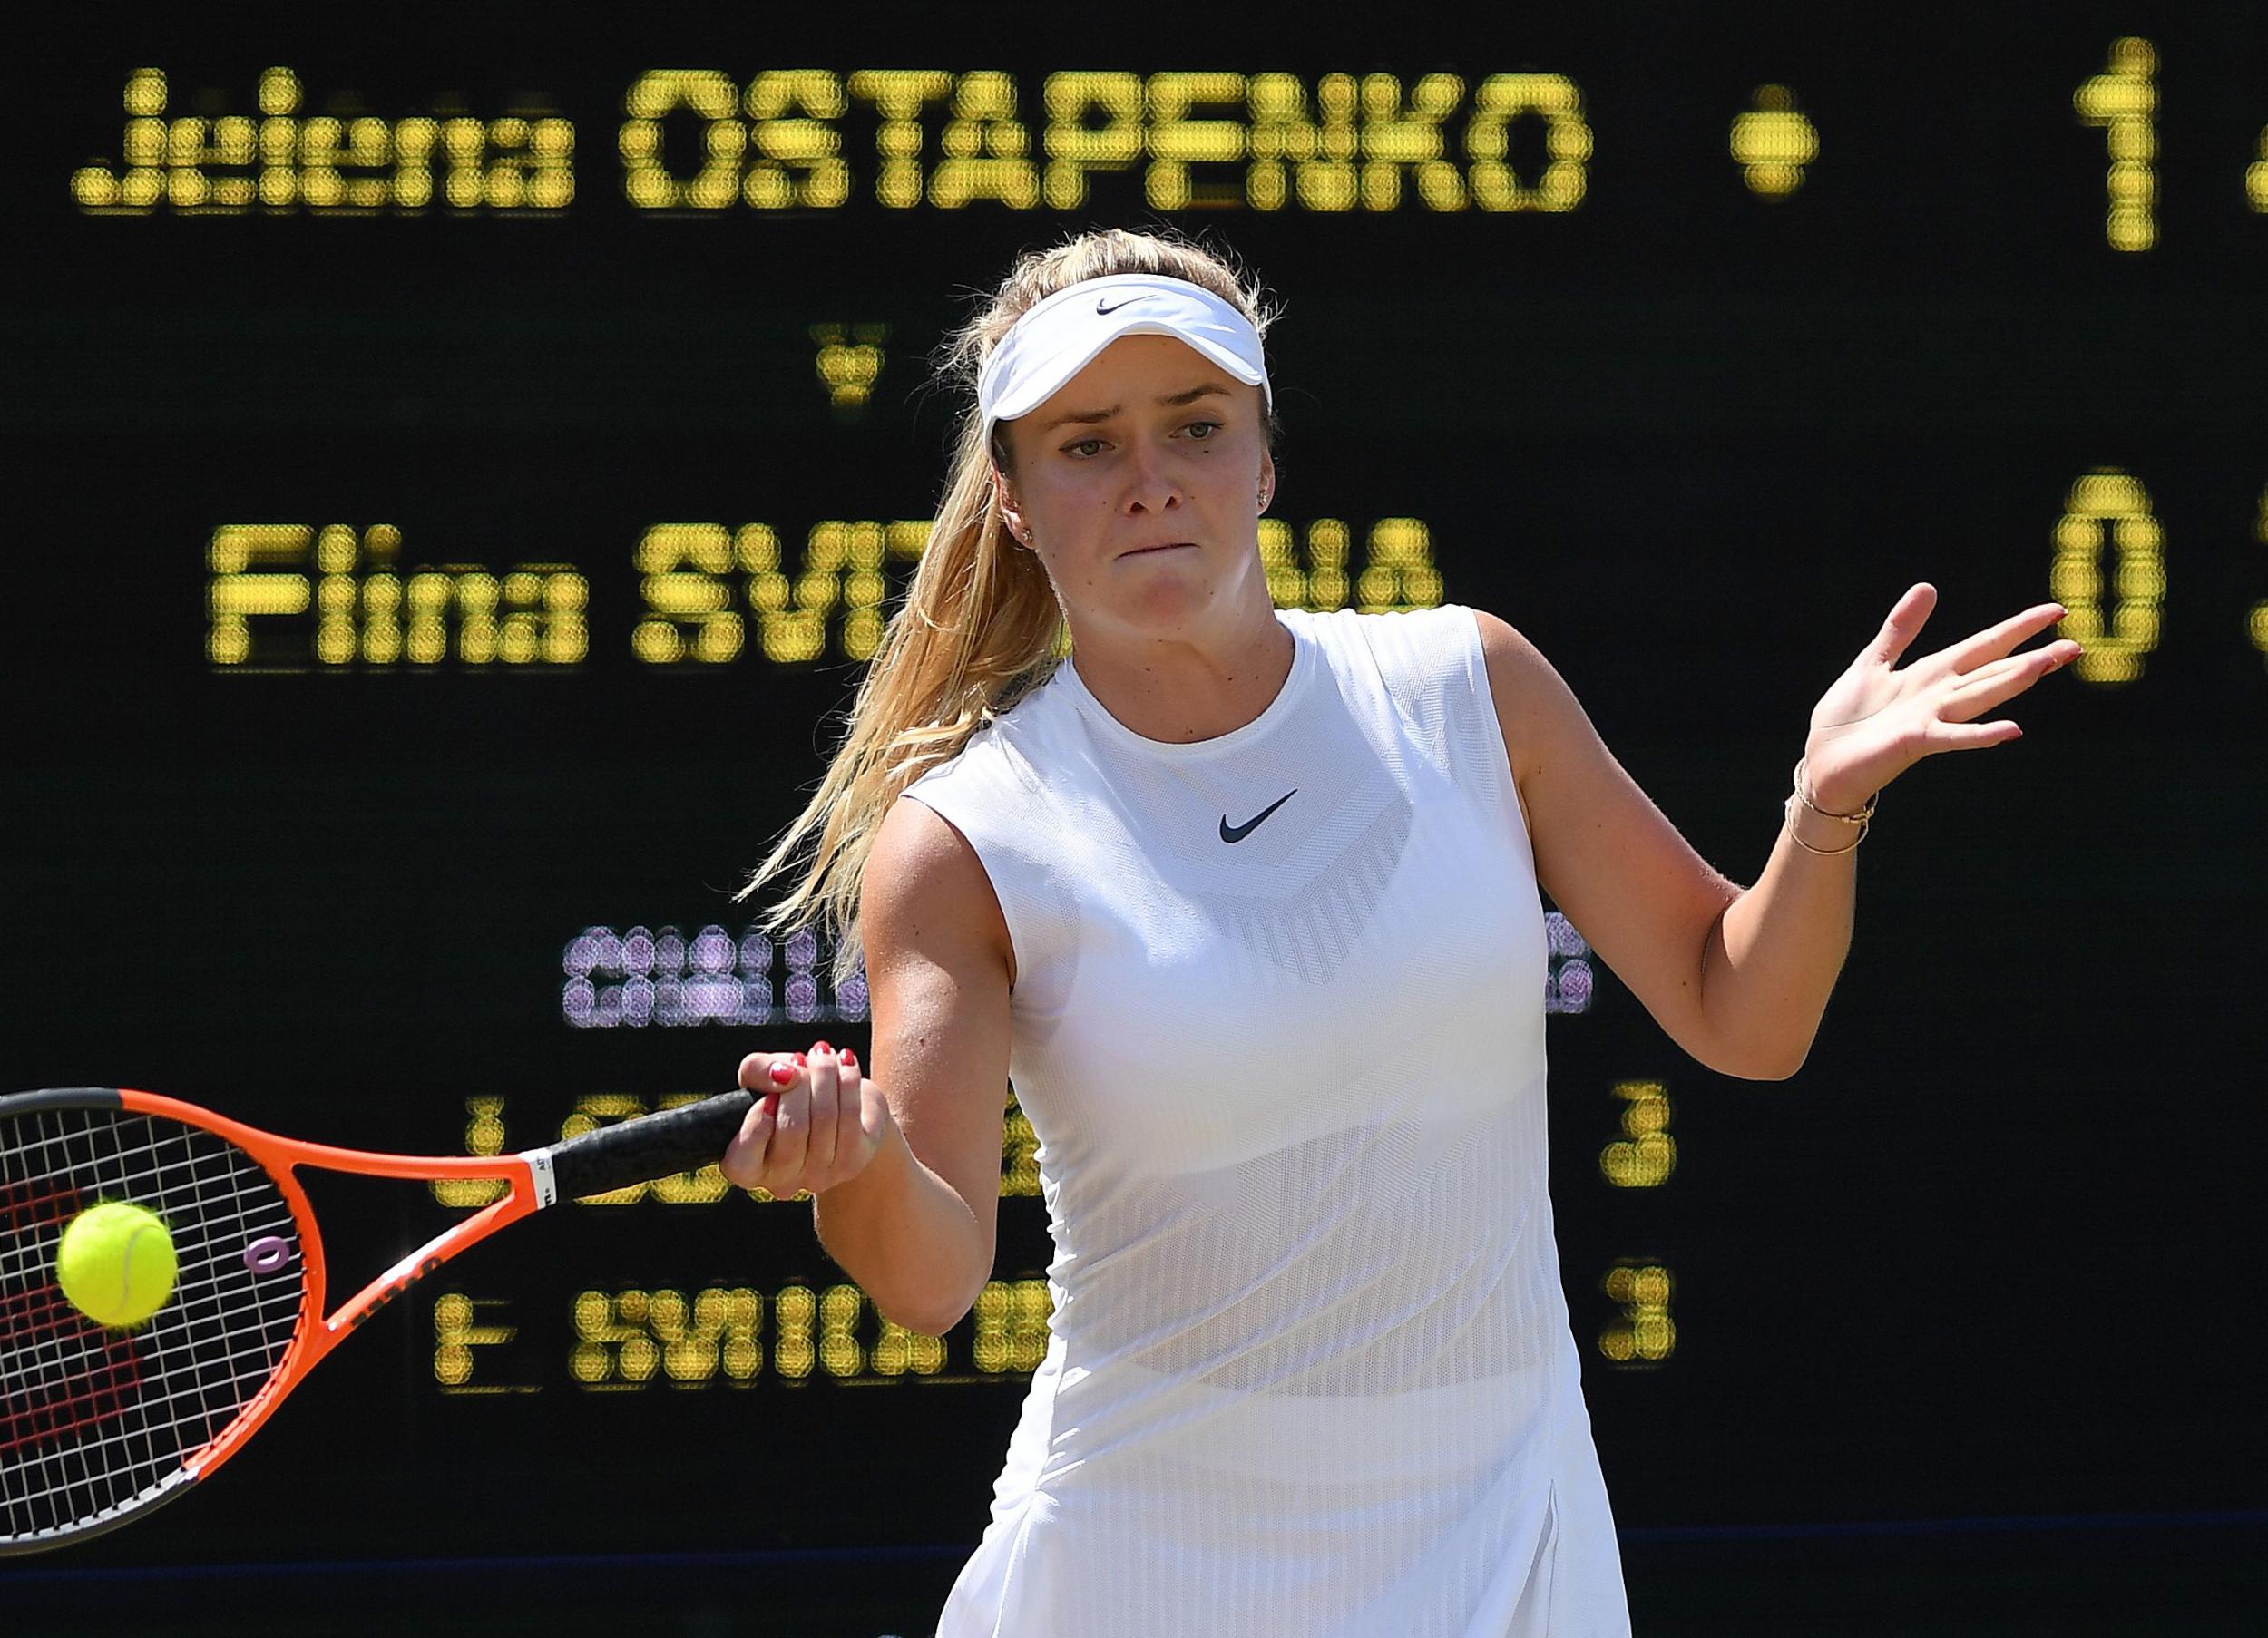 Svitolina was the fourth seed at this year's Championships